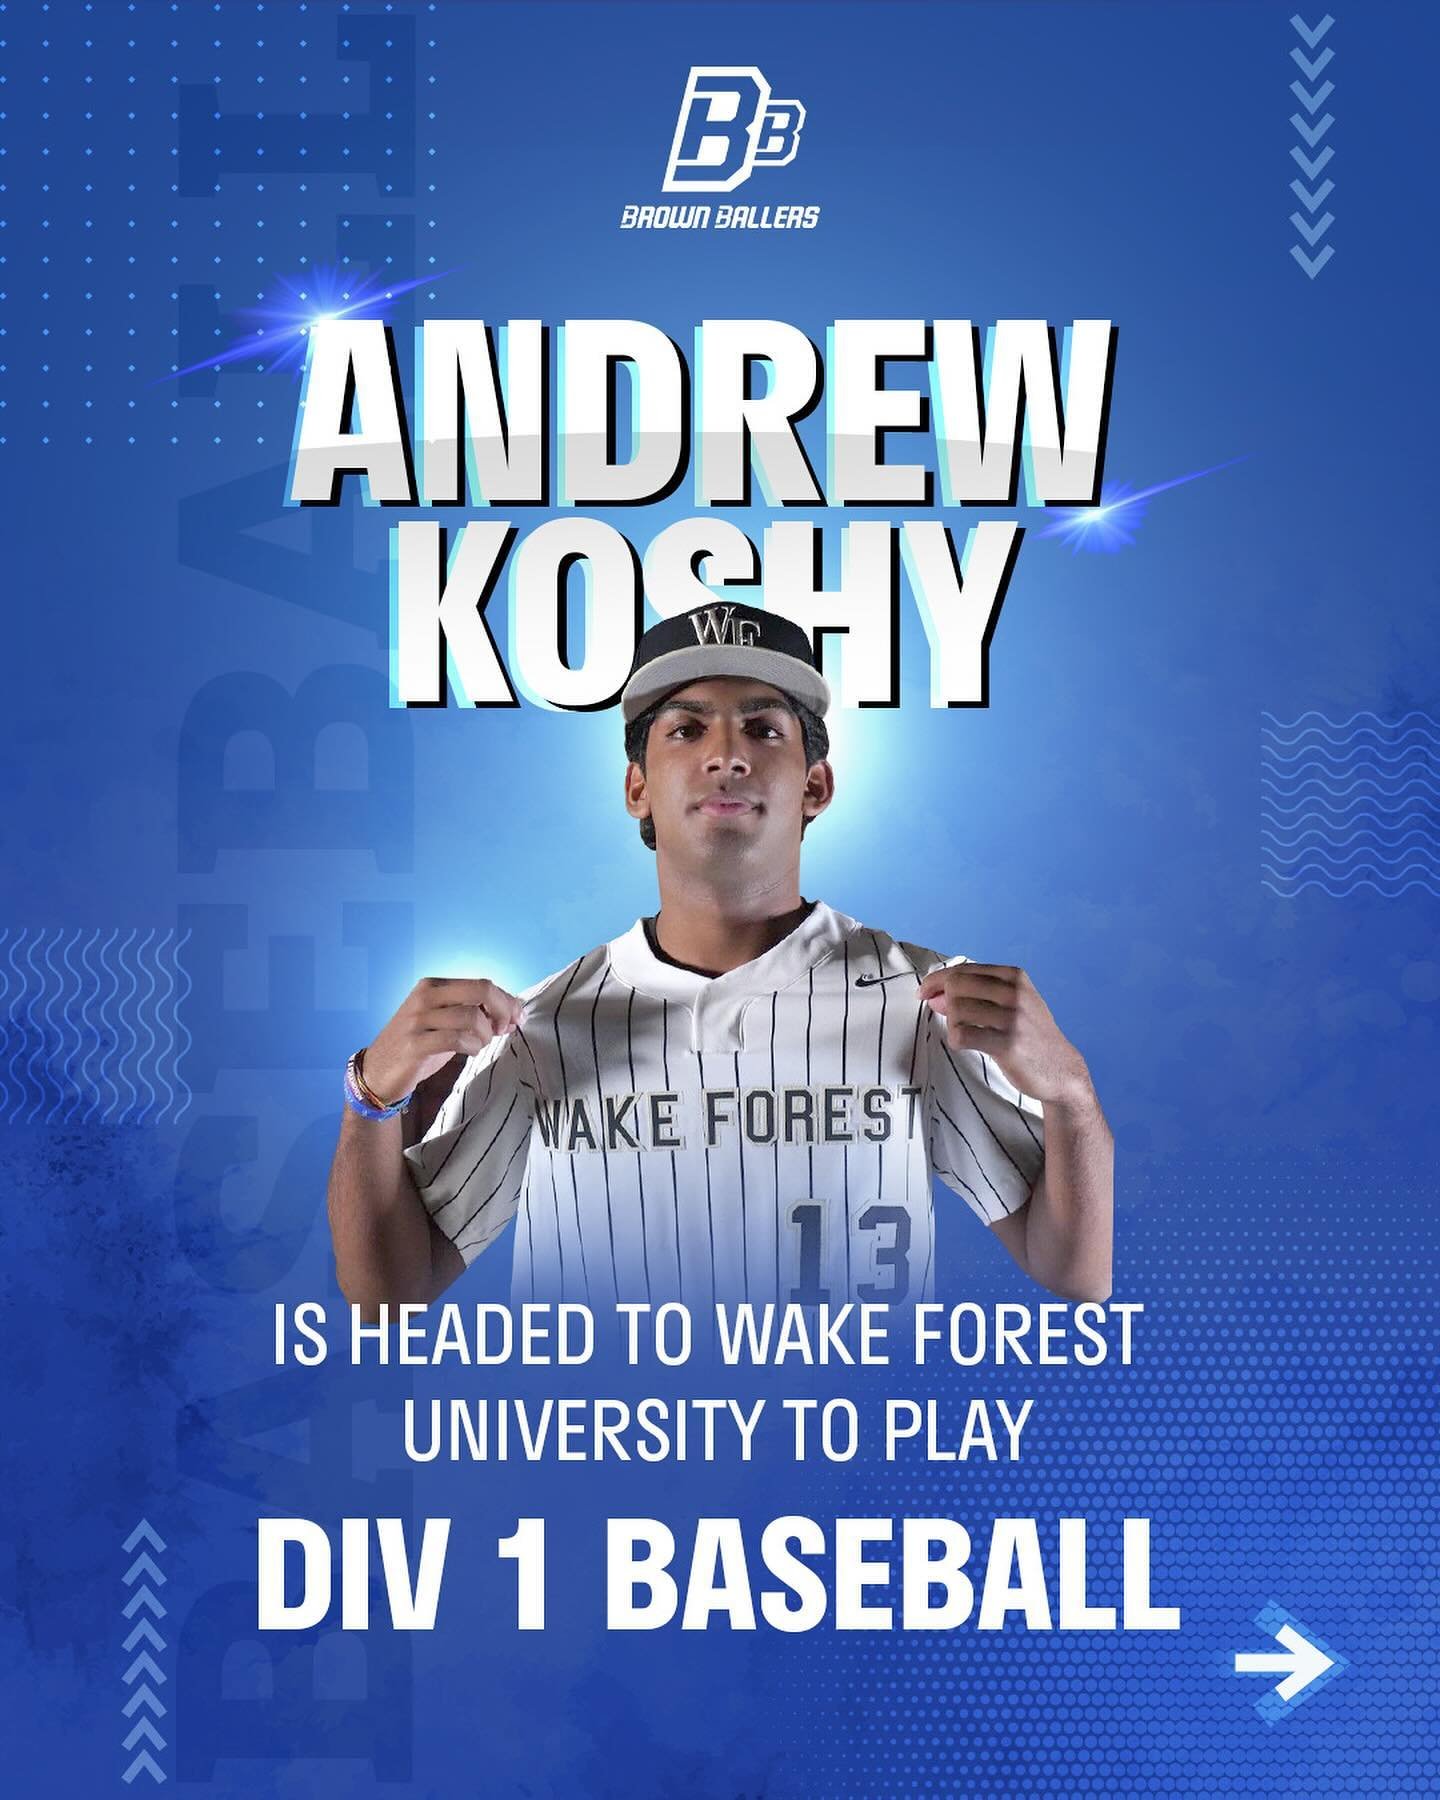 @andrew.koshy is bringing his A-game to Wake Forest University as he joins their Division 1 baseball team! @wakebaseball 

🏆 Named the NSCHSAA Pitcher of the Year, Andrew dominated the mound with a flawless 5-0 record and a remarkable 0.57 ERA durin